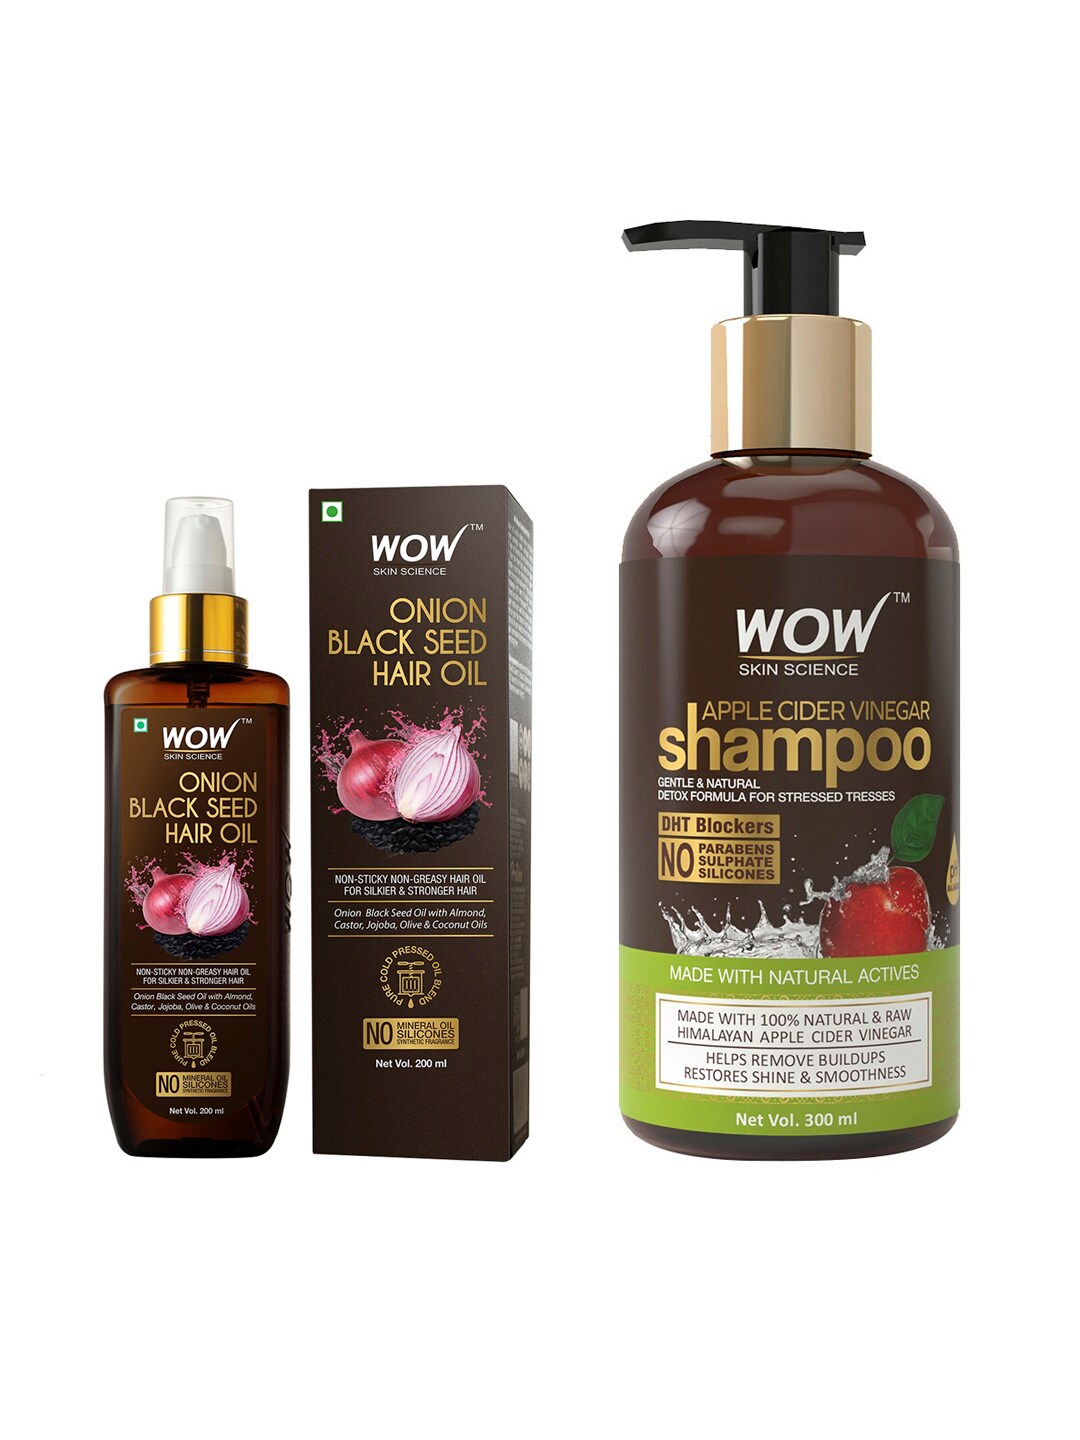 WOW SKIN SCIENCE Set of Onion Black Seed Hair Oil & Apple Cider Vinegar Shampoo Price in India